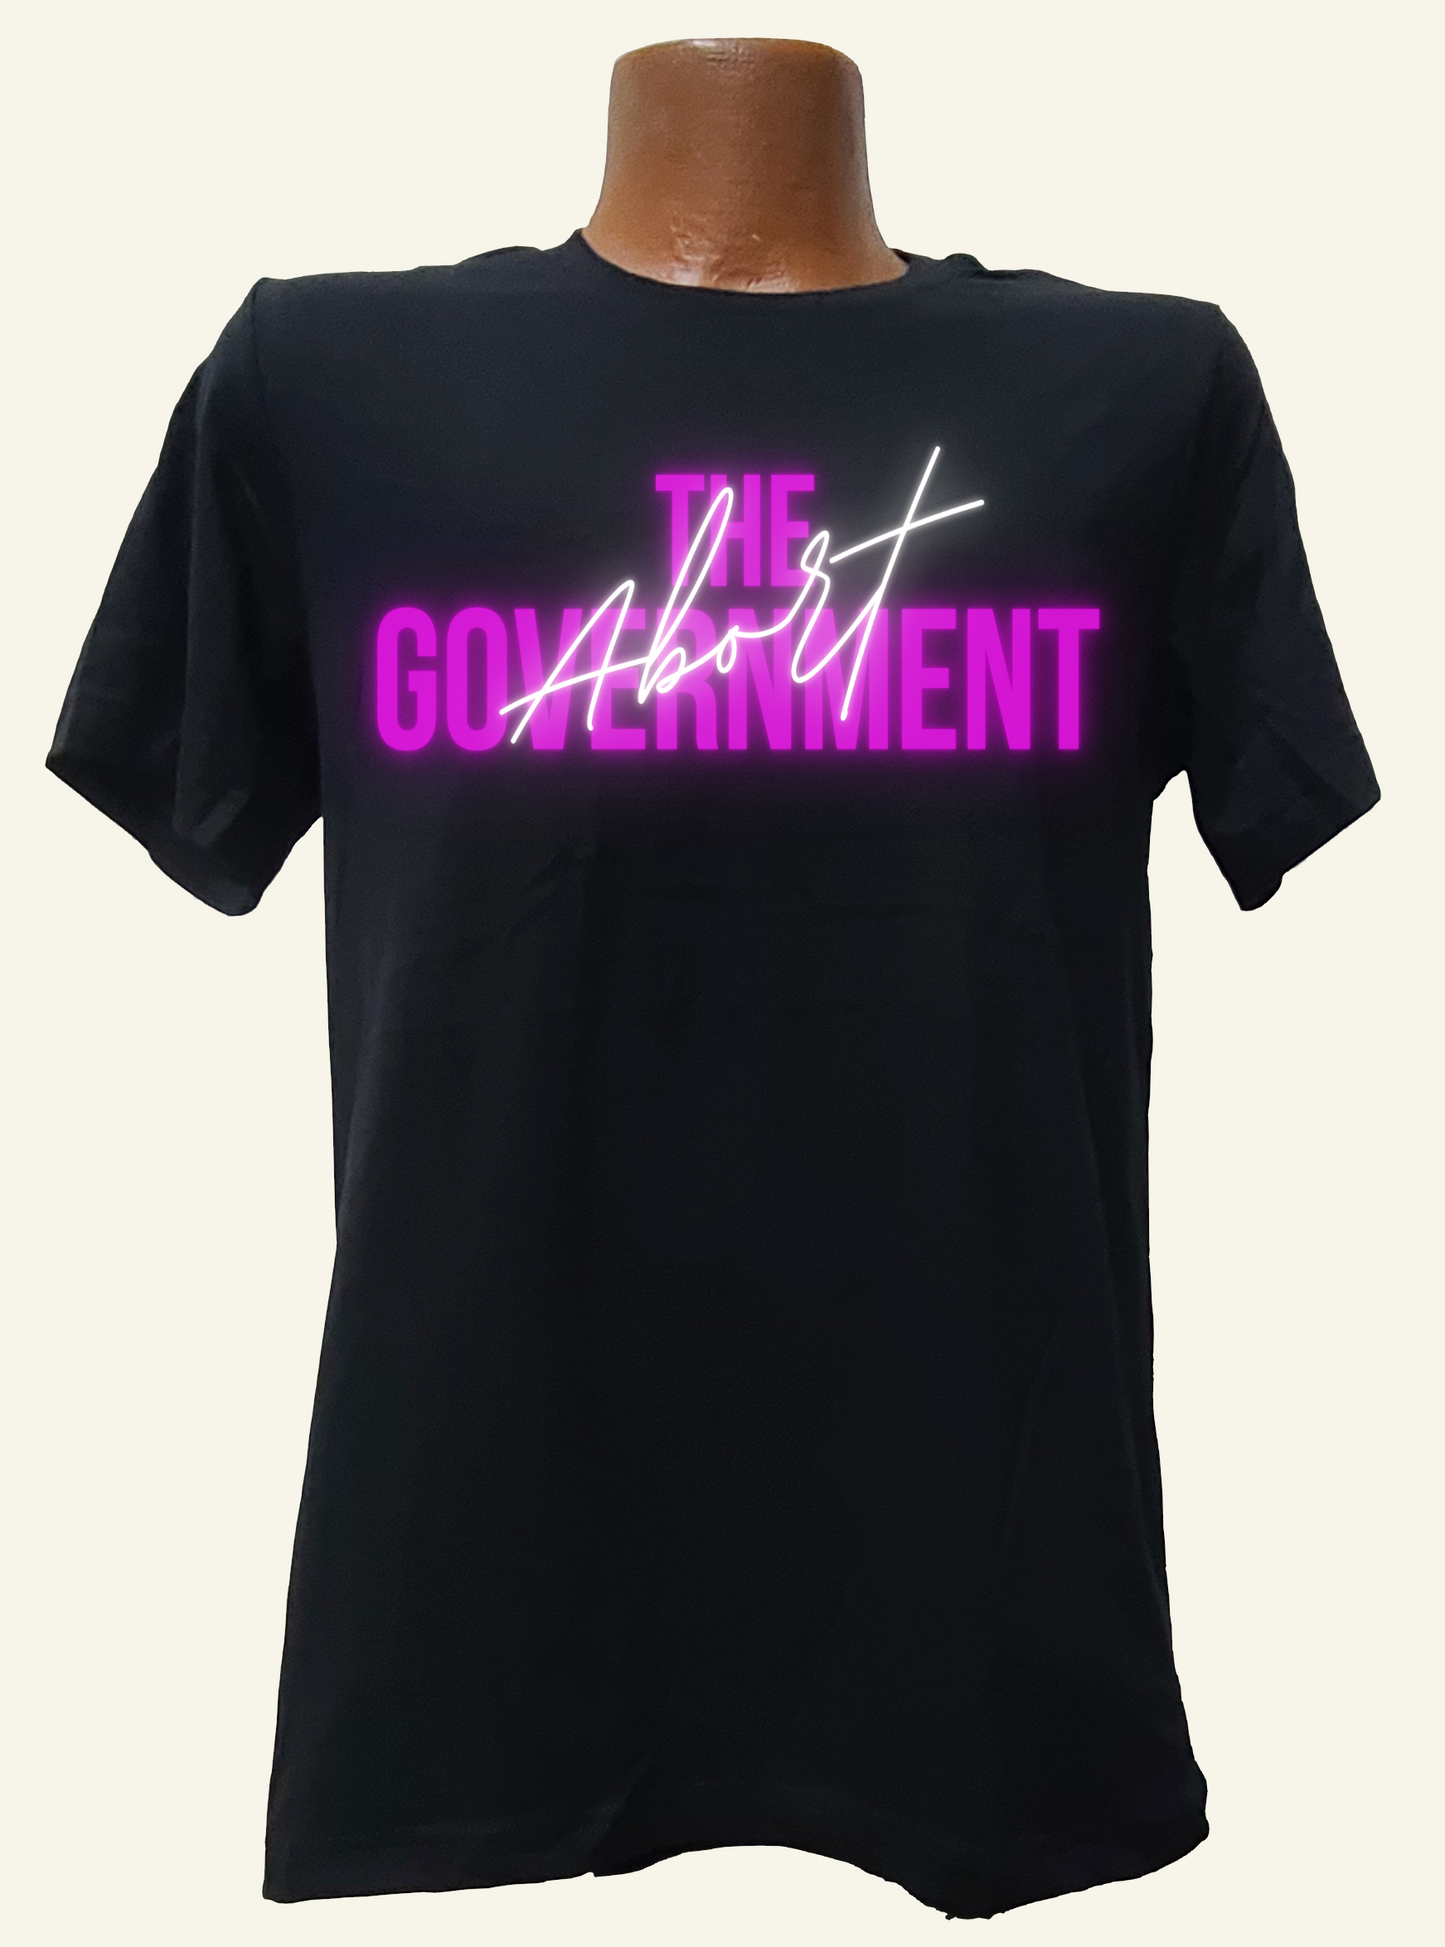 Abort the Government Tee